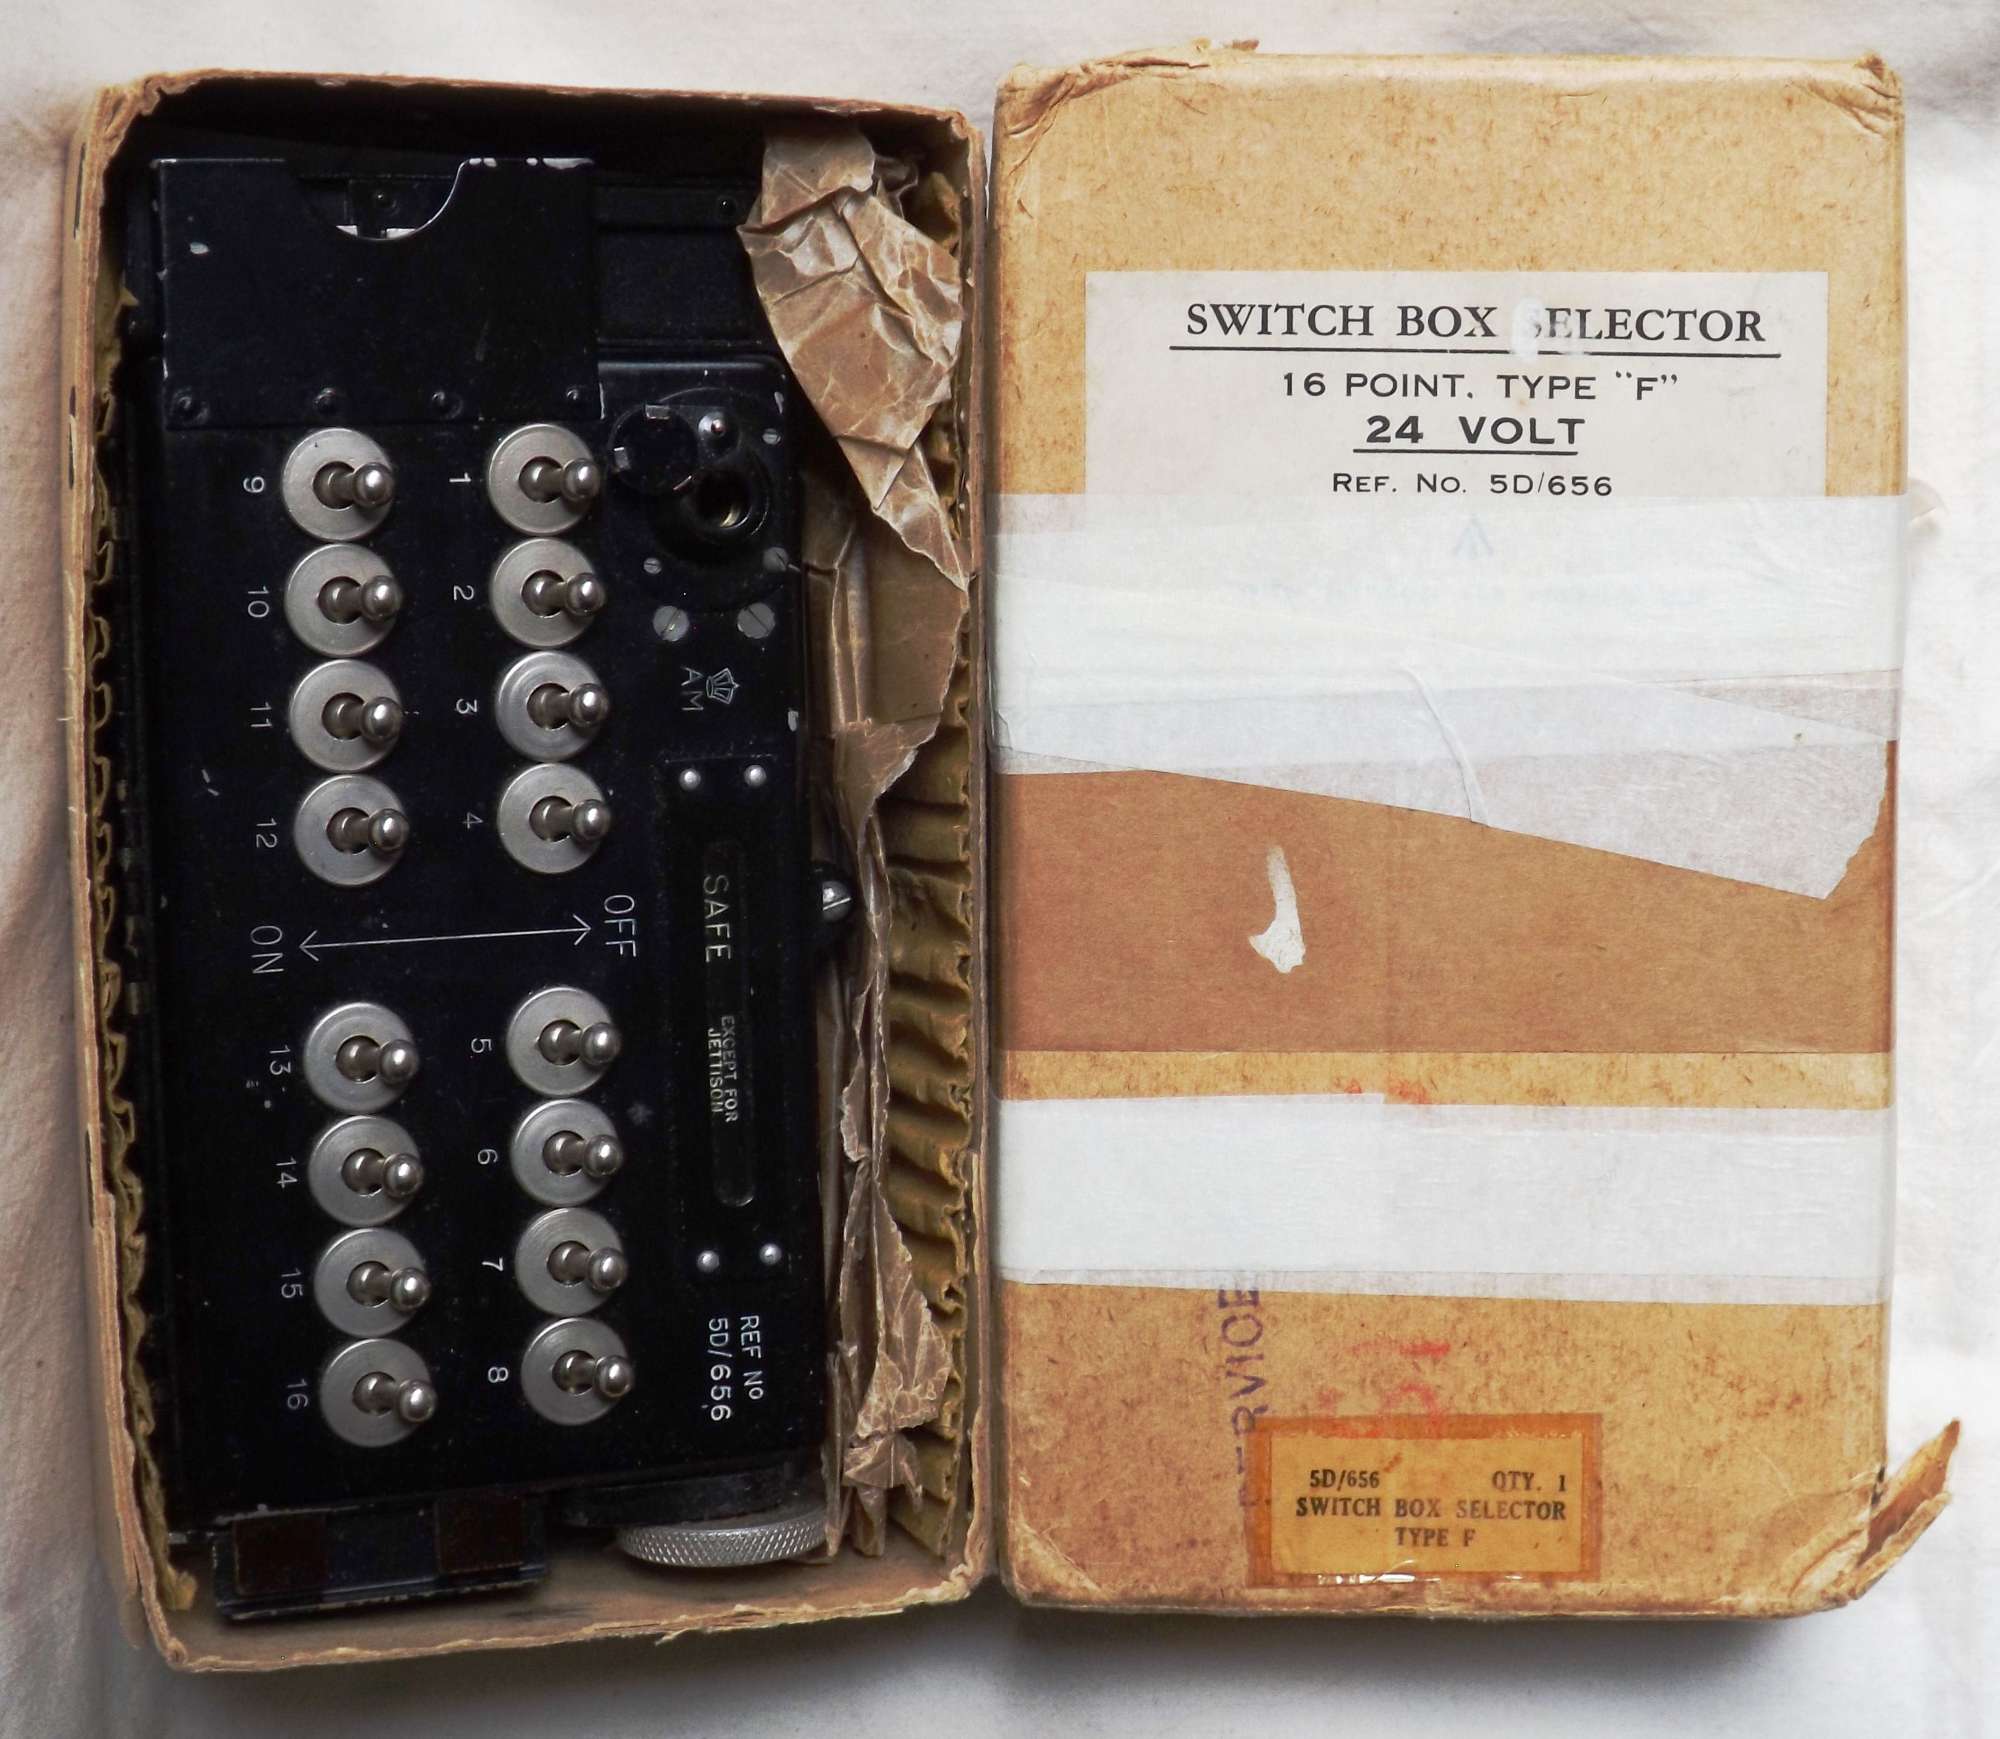 WW2 Bomb Selector Switchbox Type F 5D/656 as used in AVRO Lancaster bombers